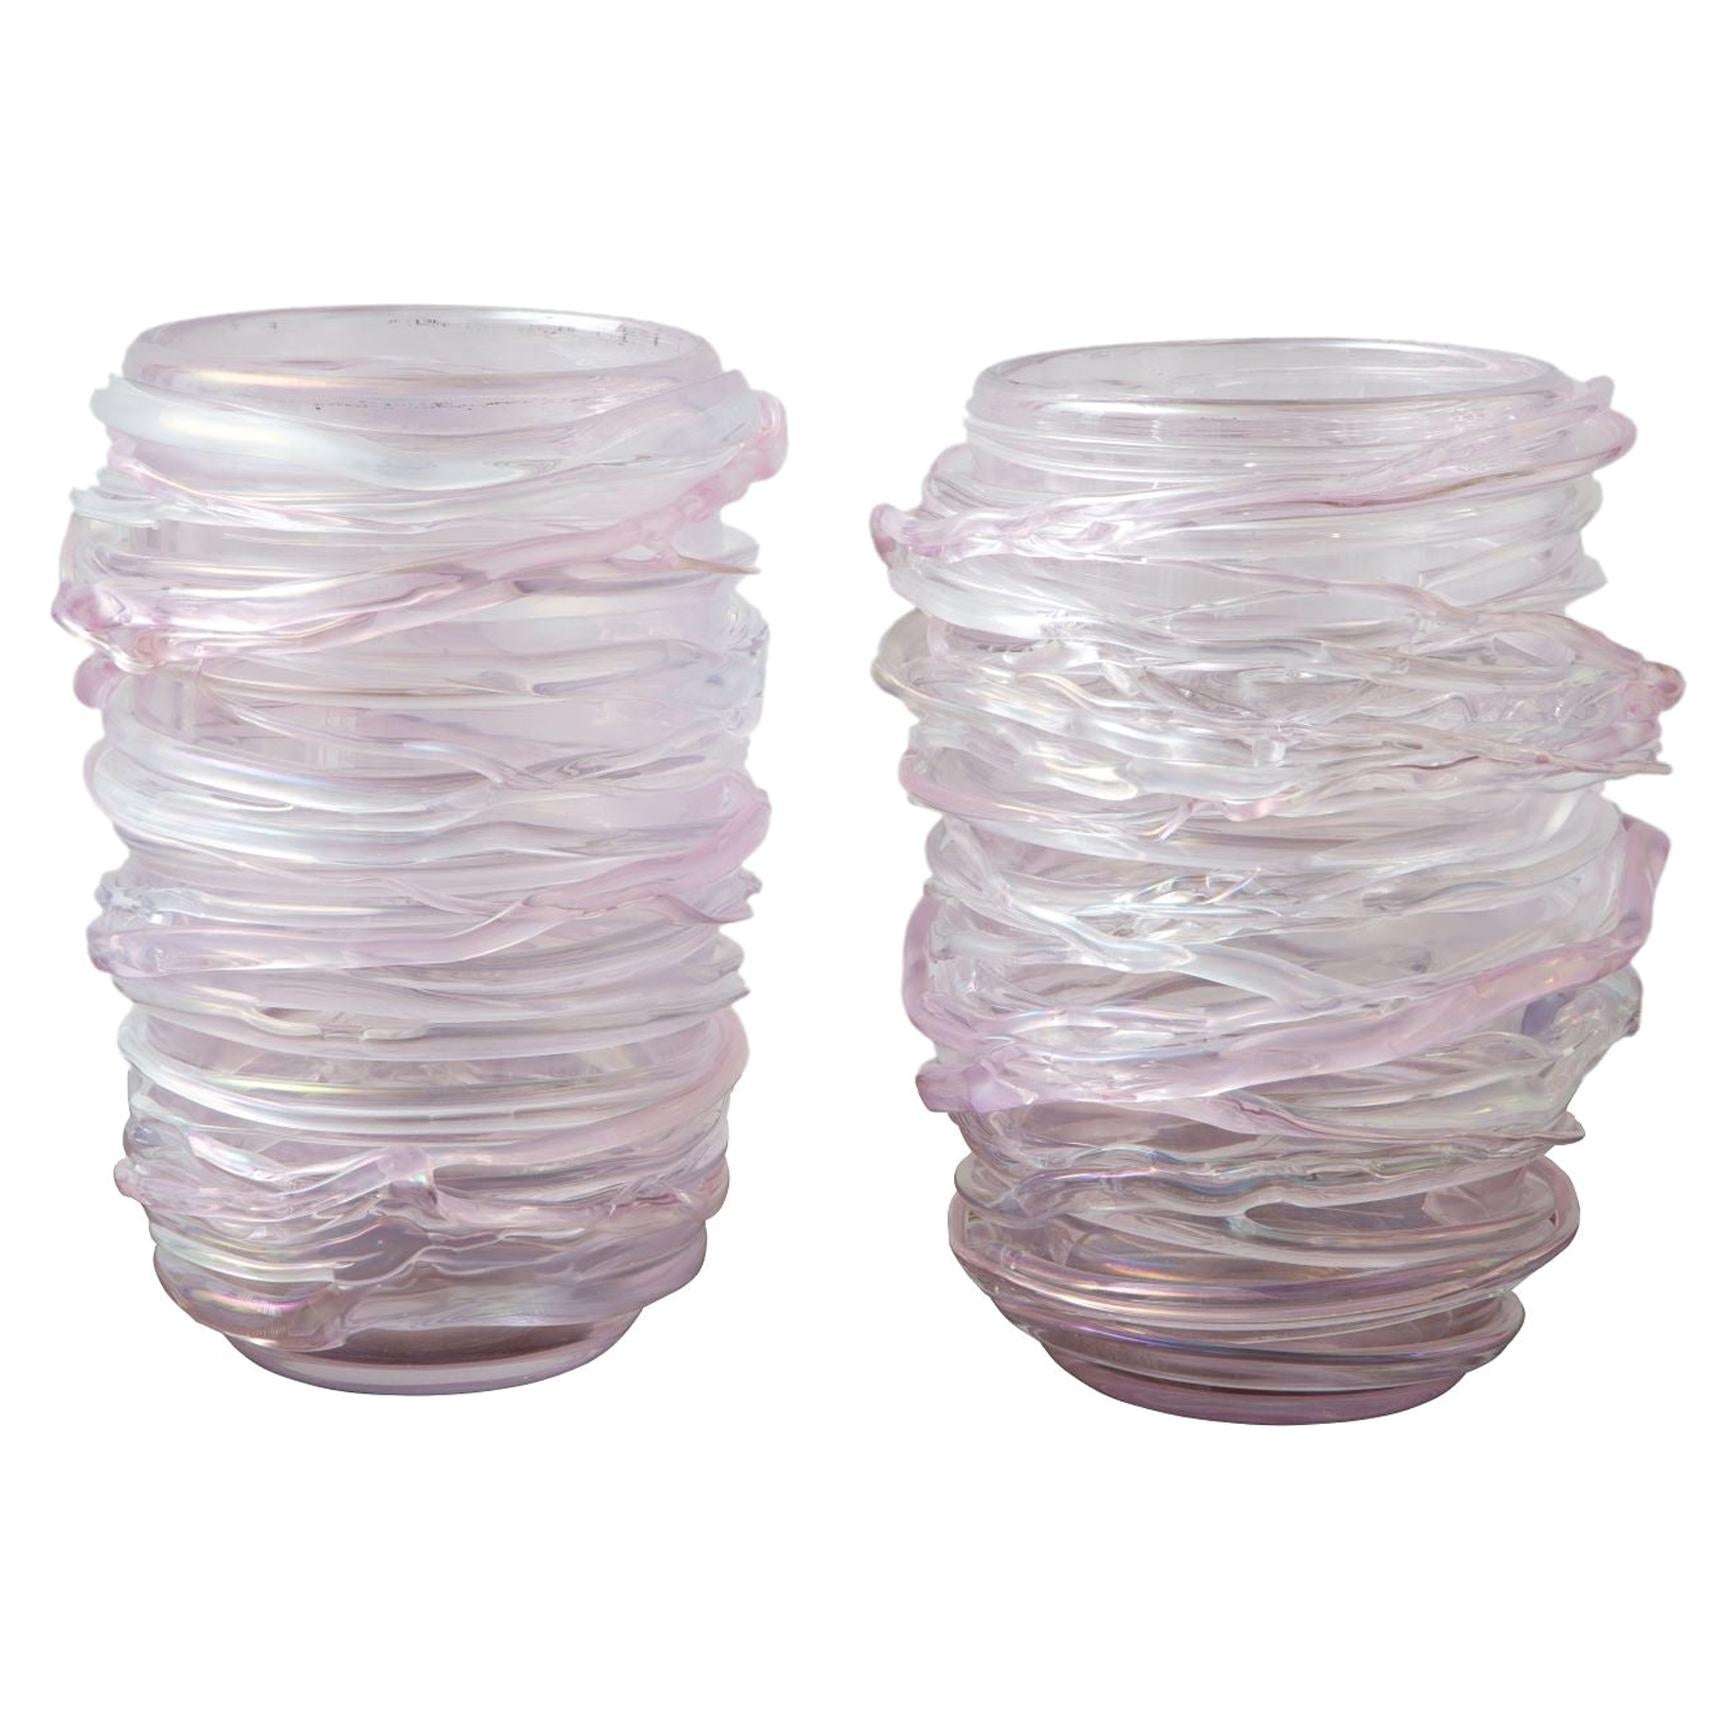 Pair of Large Pink Murano Glass Vases, in Stock